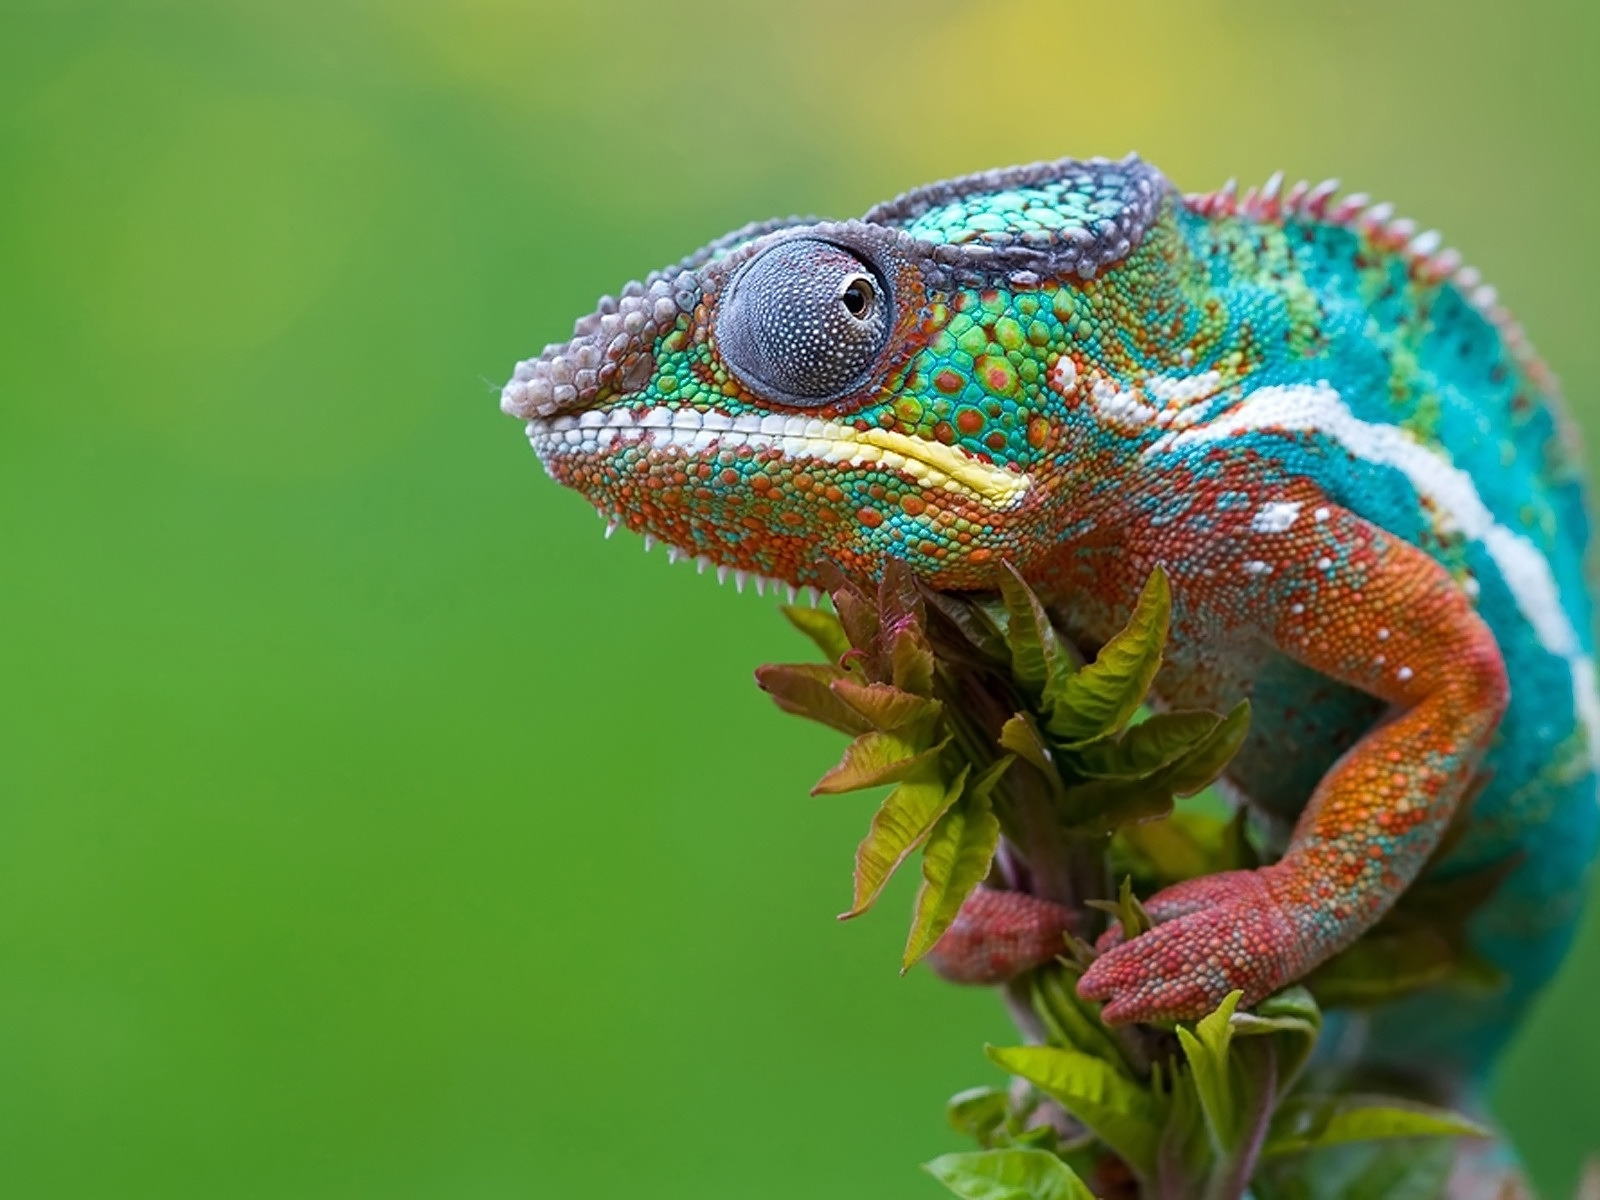 Chameleon Camouflage for 1600 x 1200 resolution